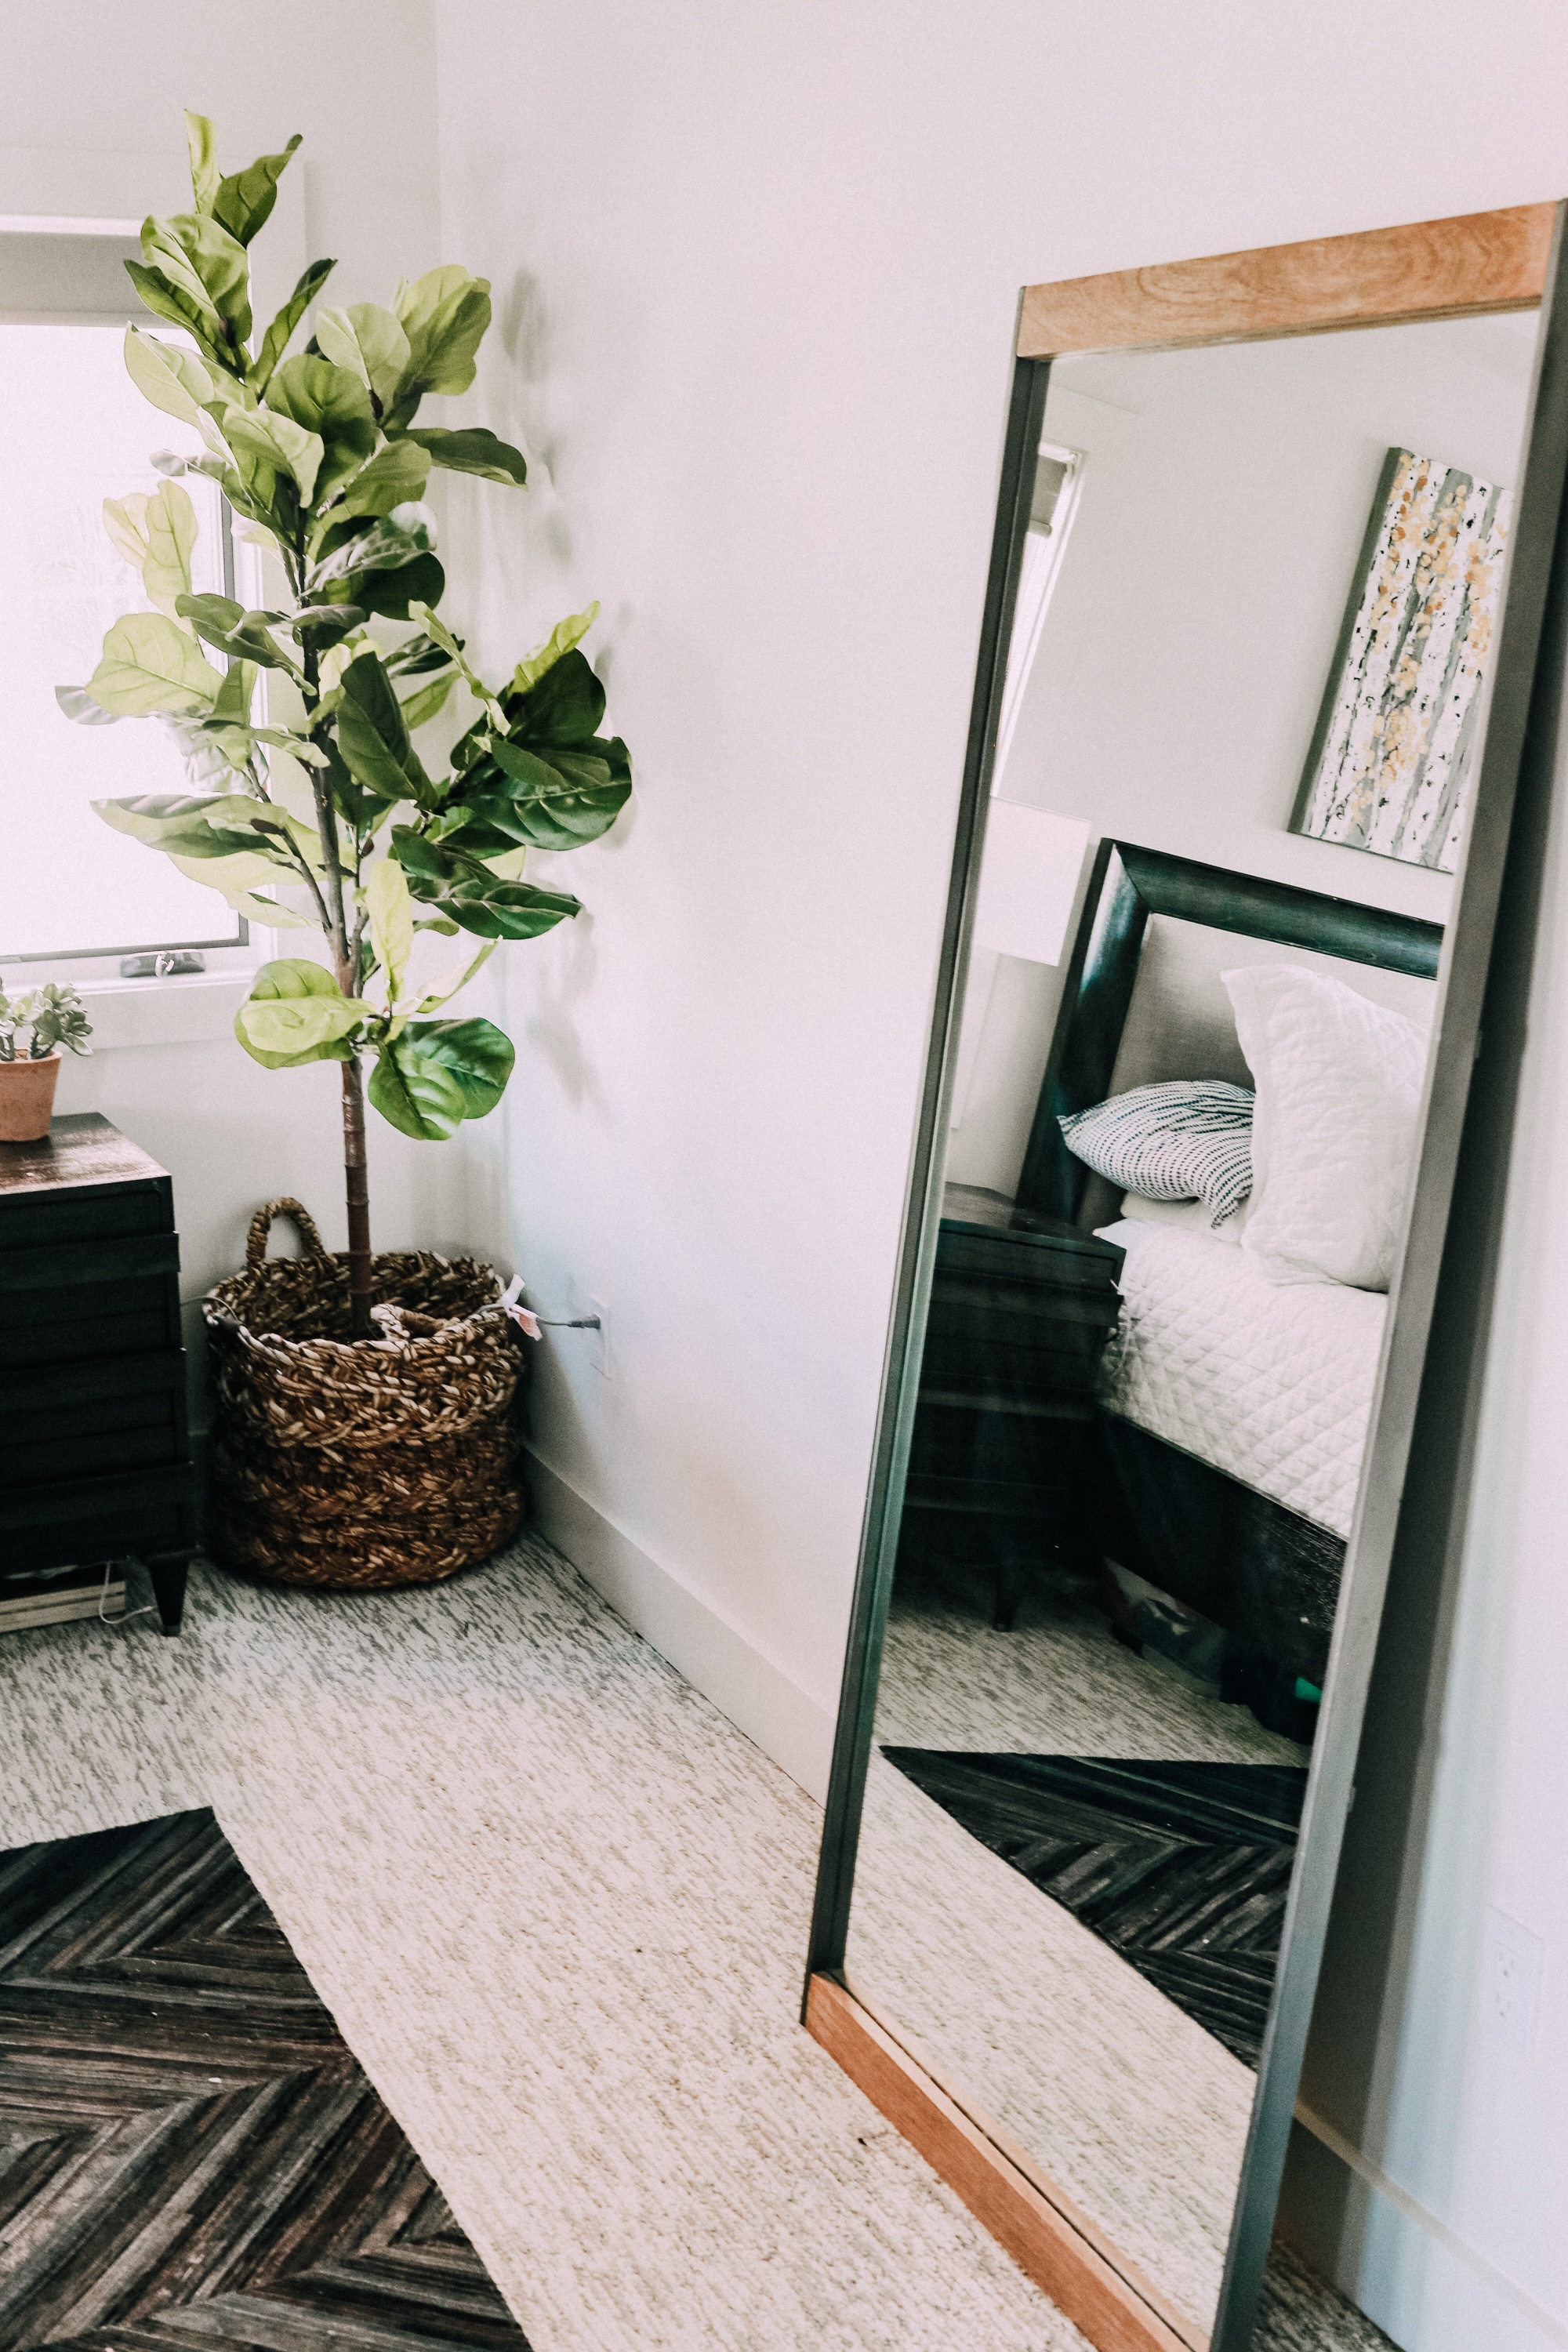 floor mirror industrial from west elm and faux tree in a basket